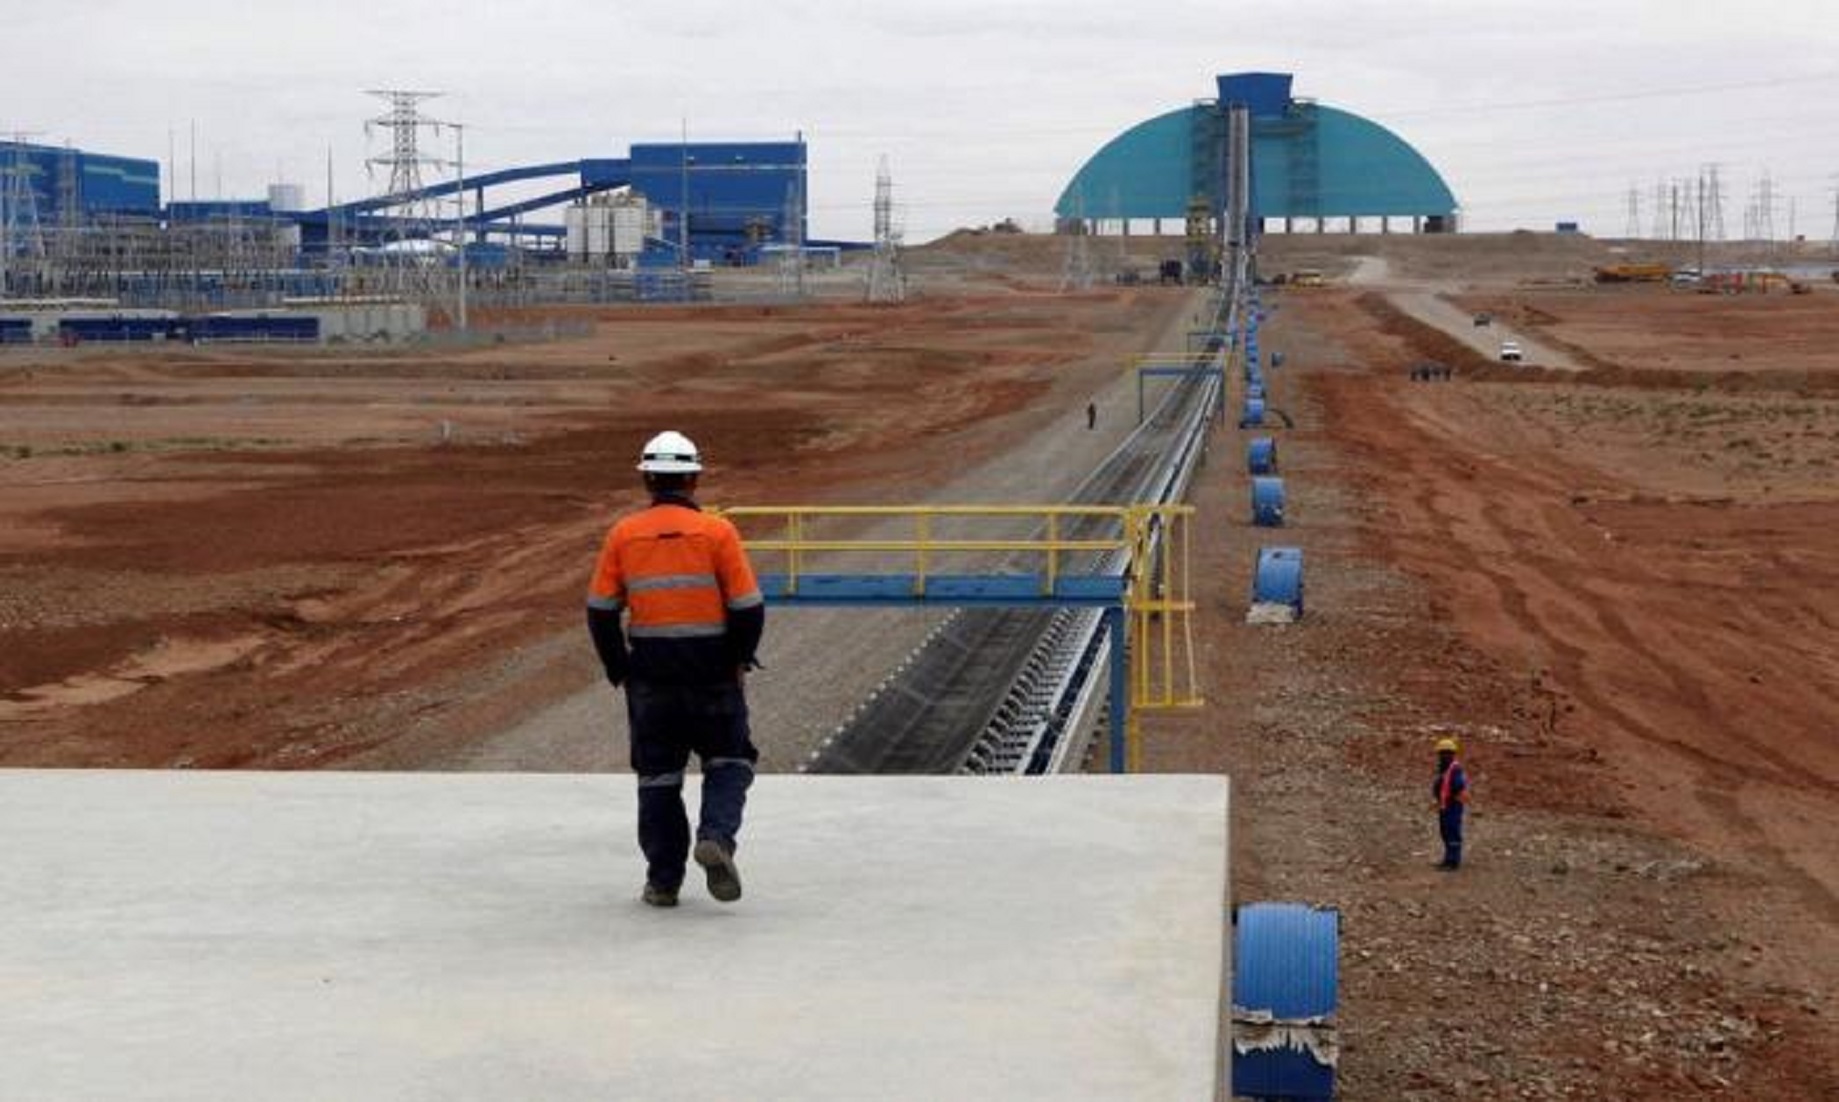 Mongolia, Mining Giant Rio Tinto End Long-Running Dispute Over Oyu Tolgoi Copper Mine